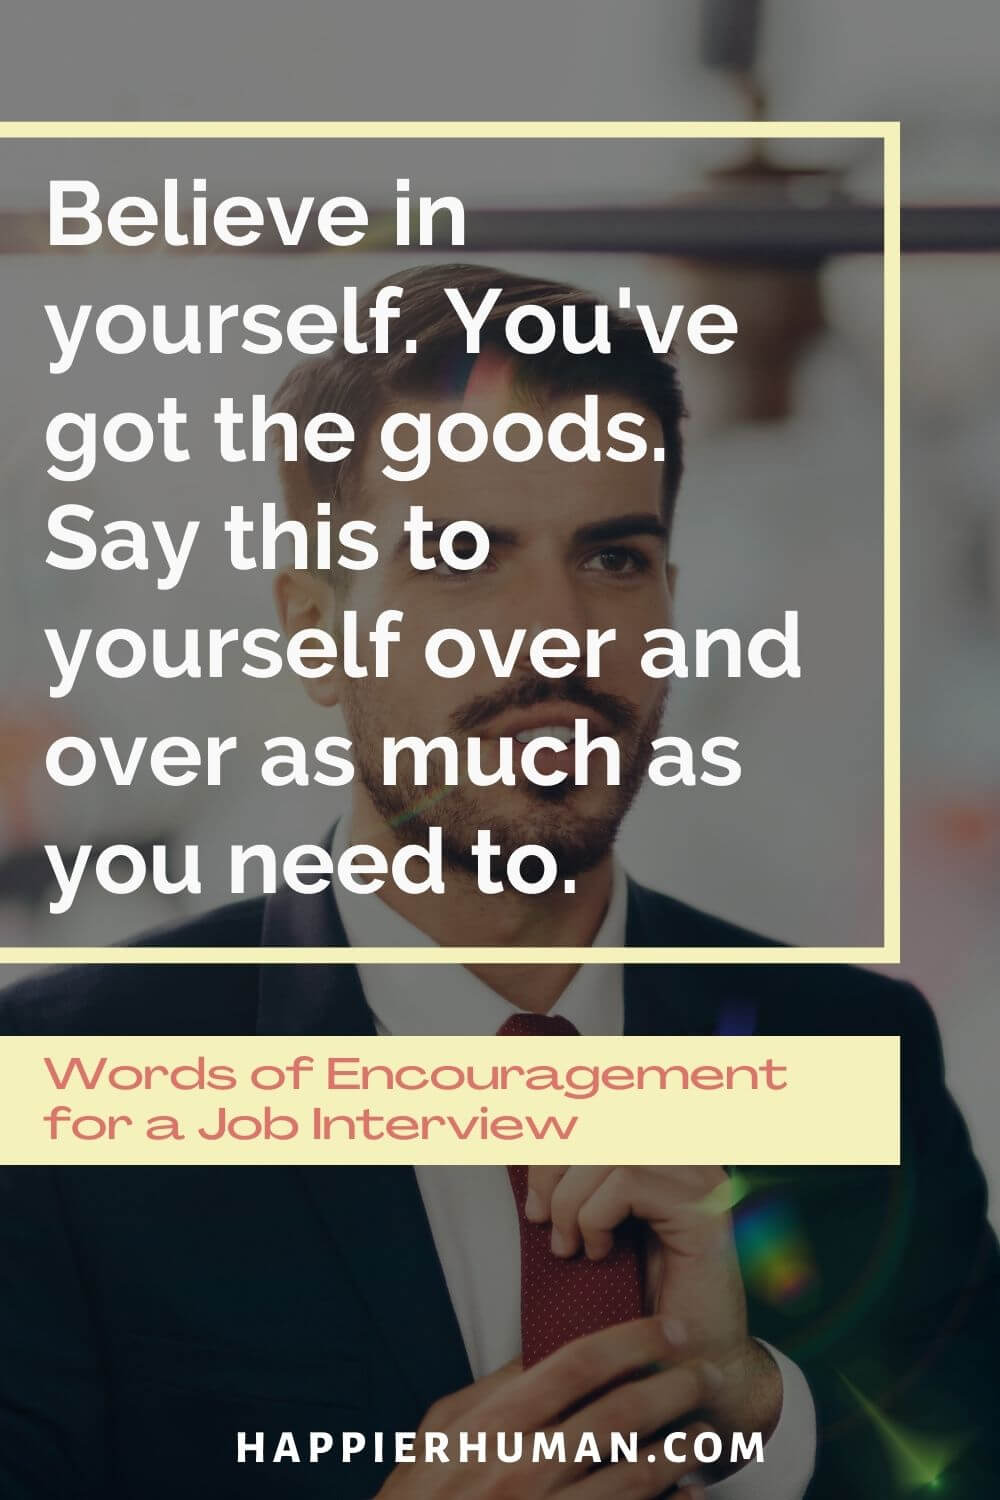 good luck quotes for interview